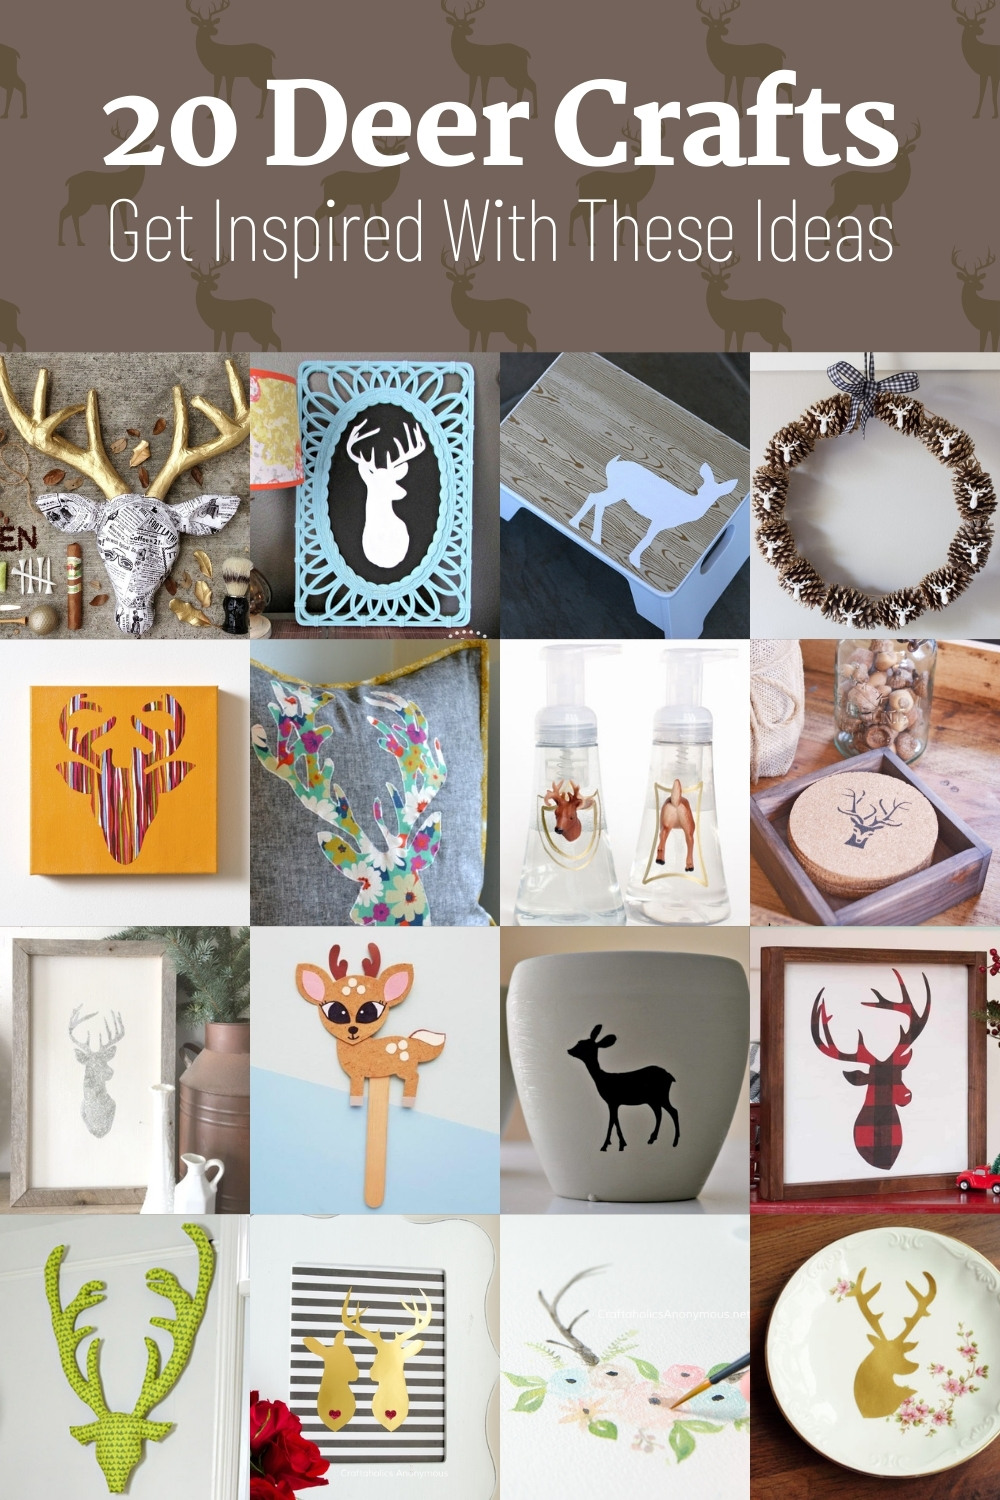 20 Deer Crafts for Fall